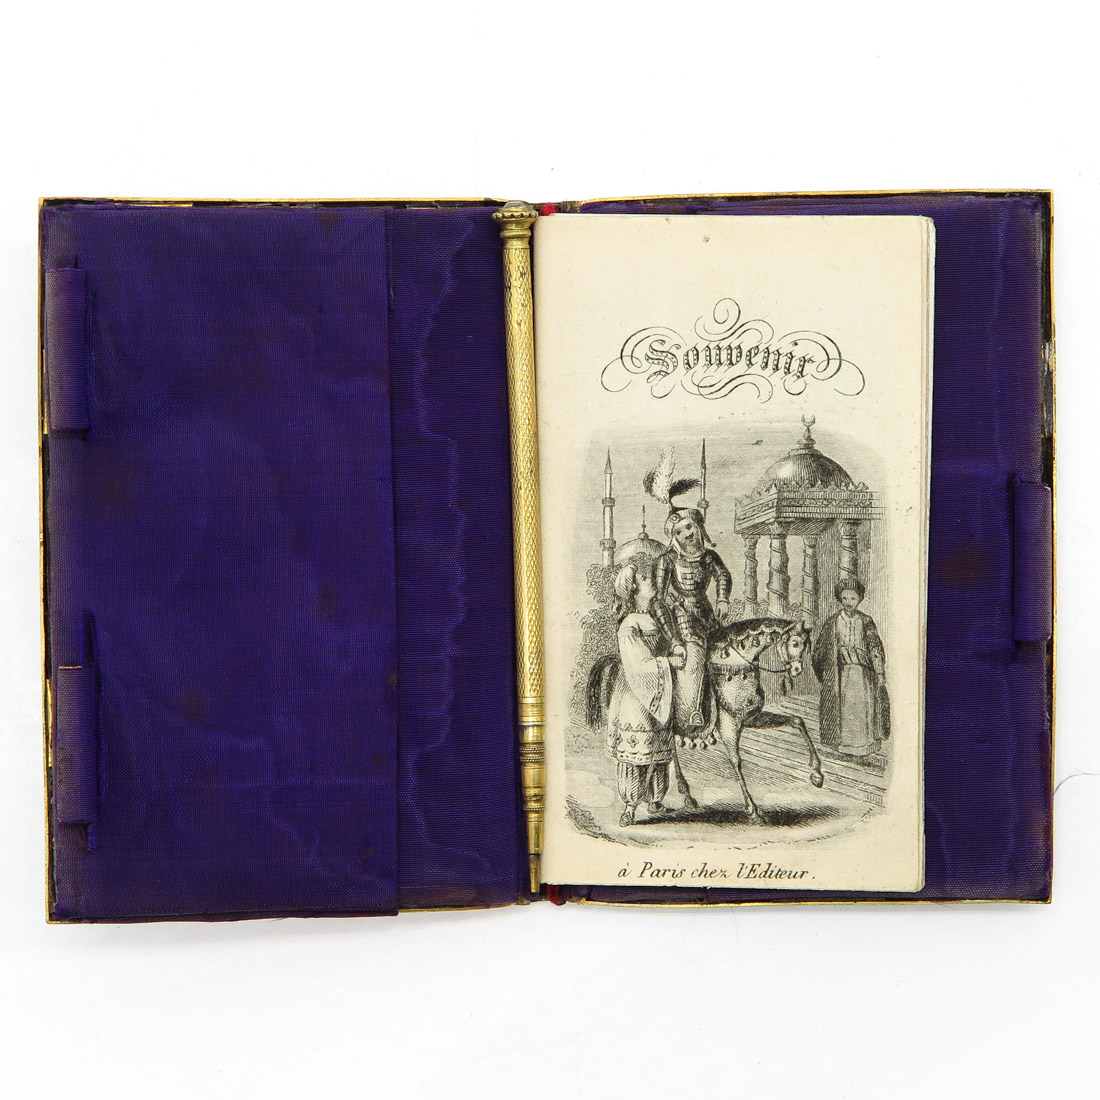 19th Century French Book Cover & Souvenir Book - Image 2 of 2